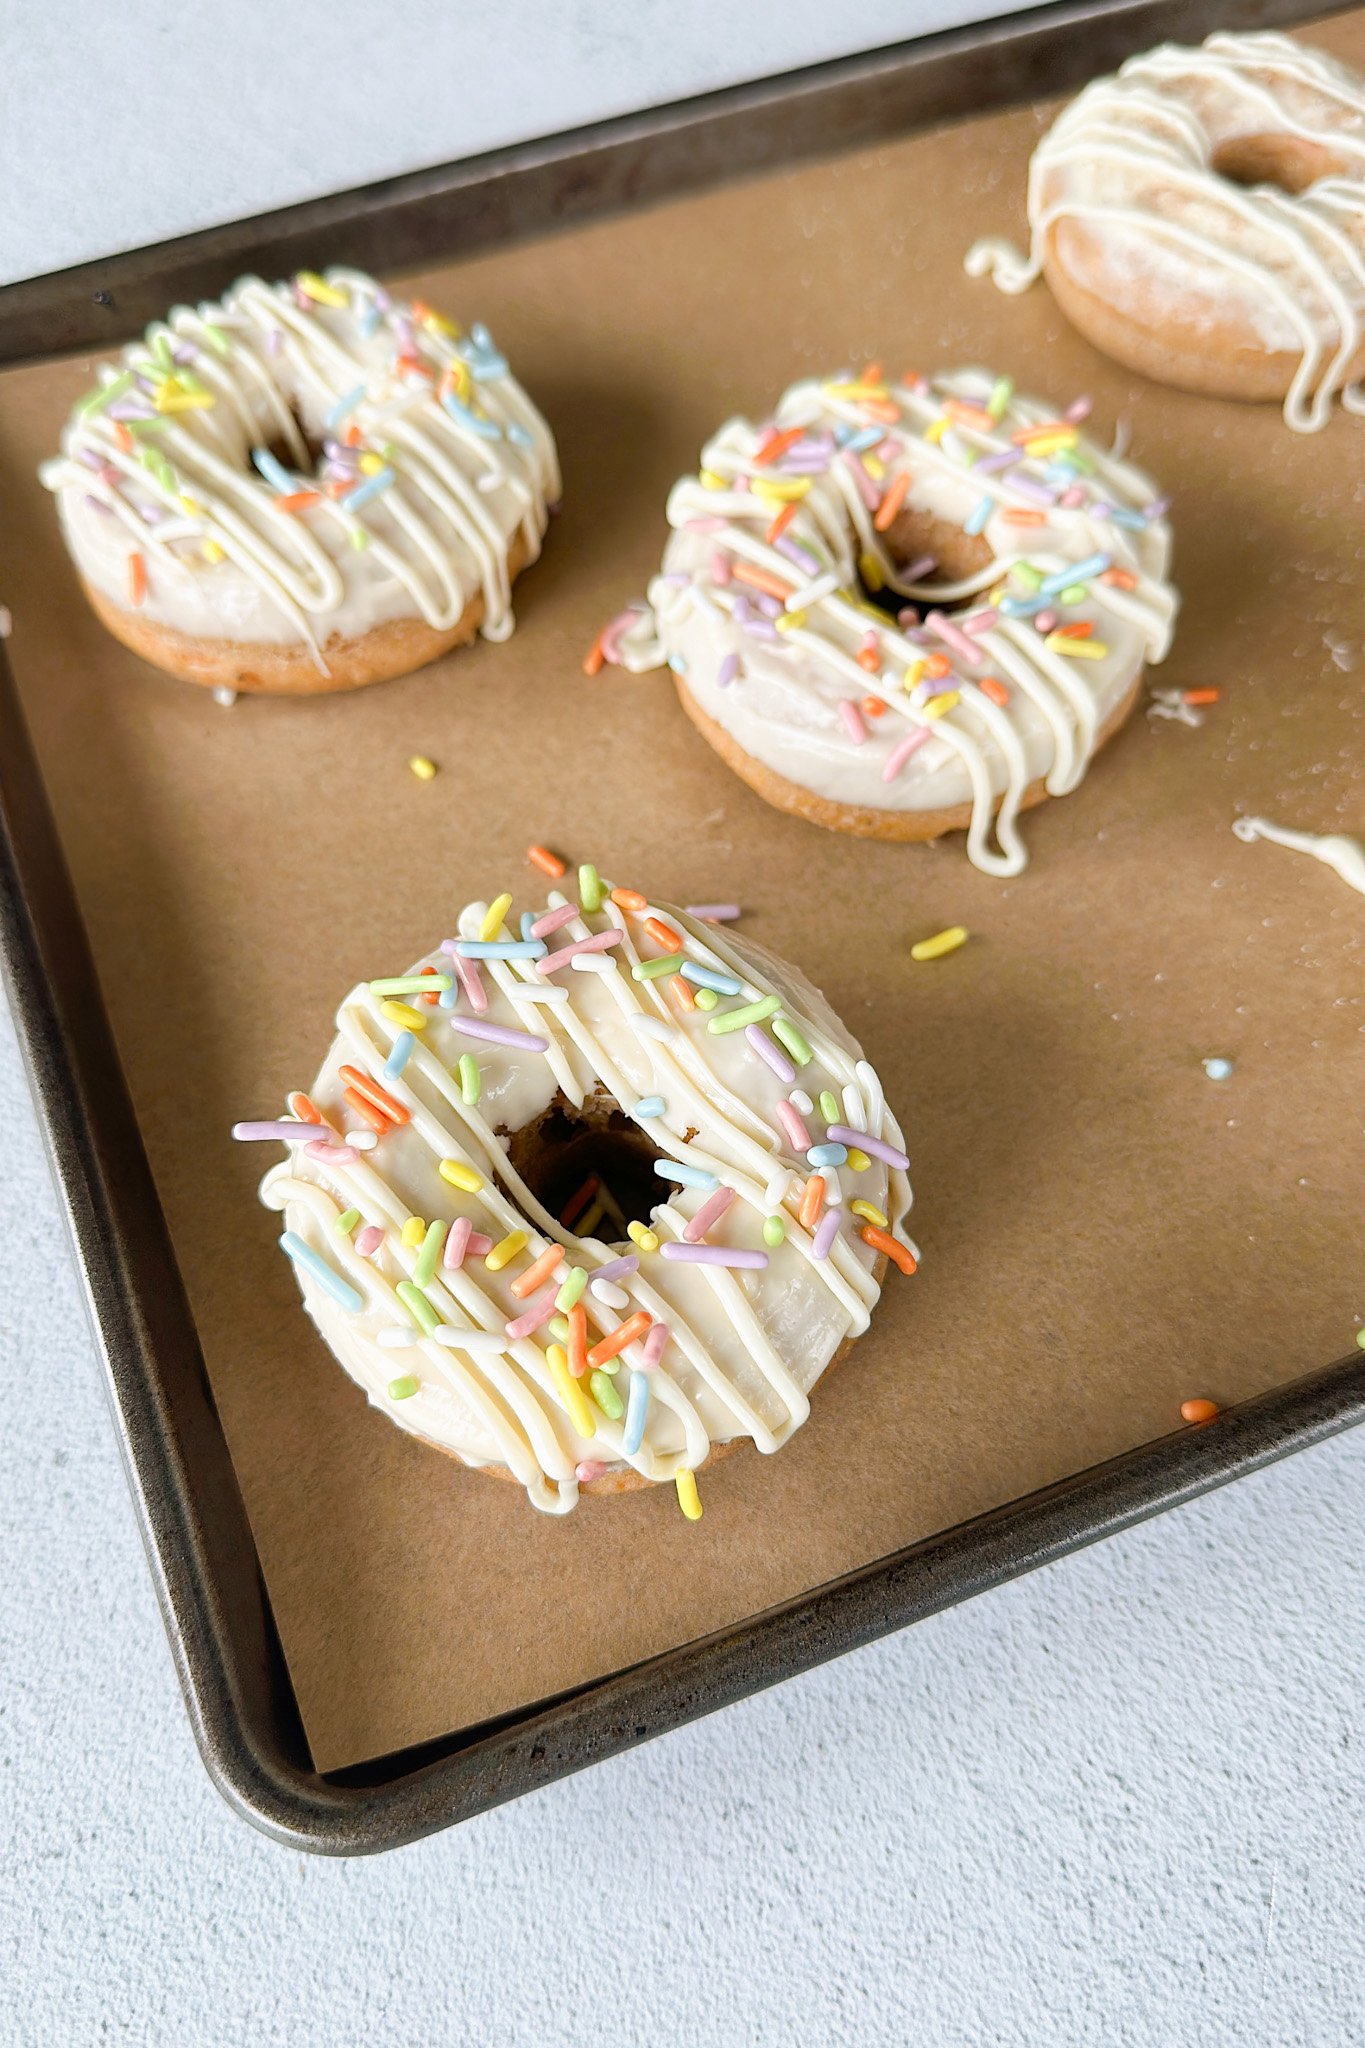 Baked carrot cake donuts on a pan.